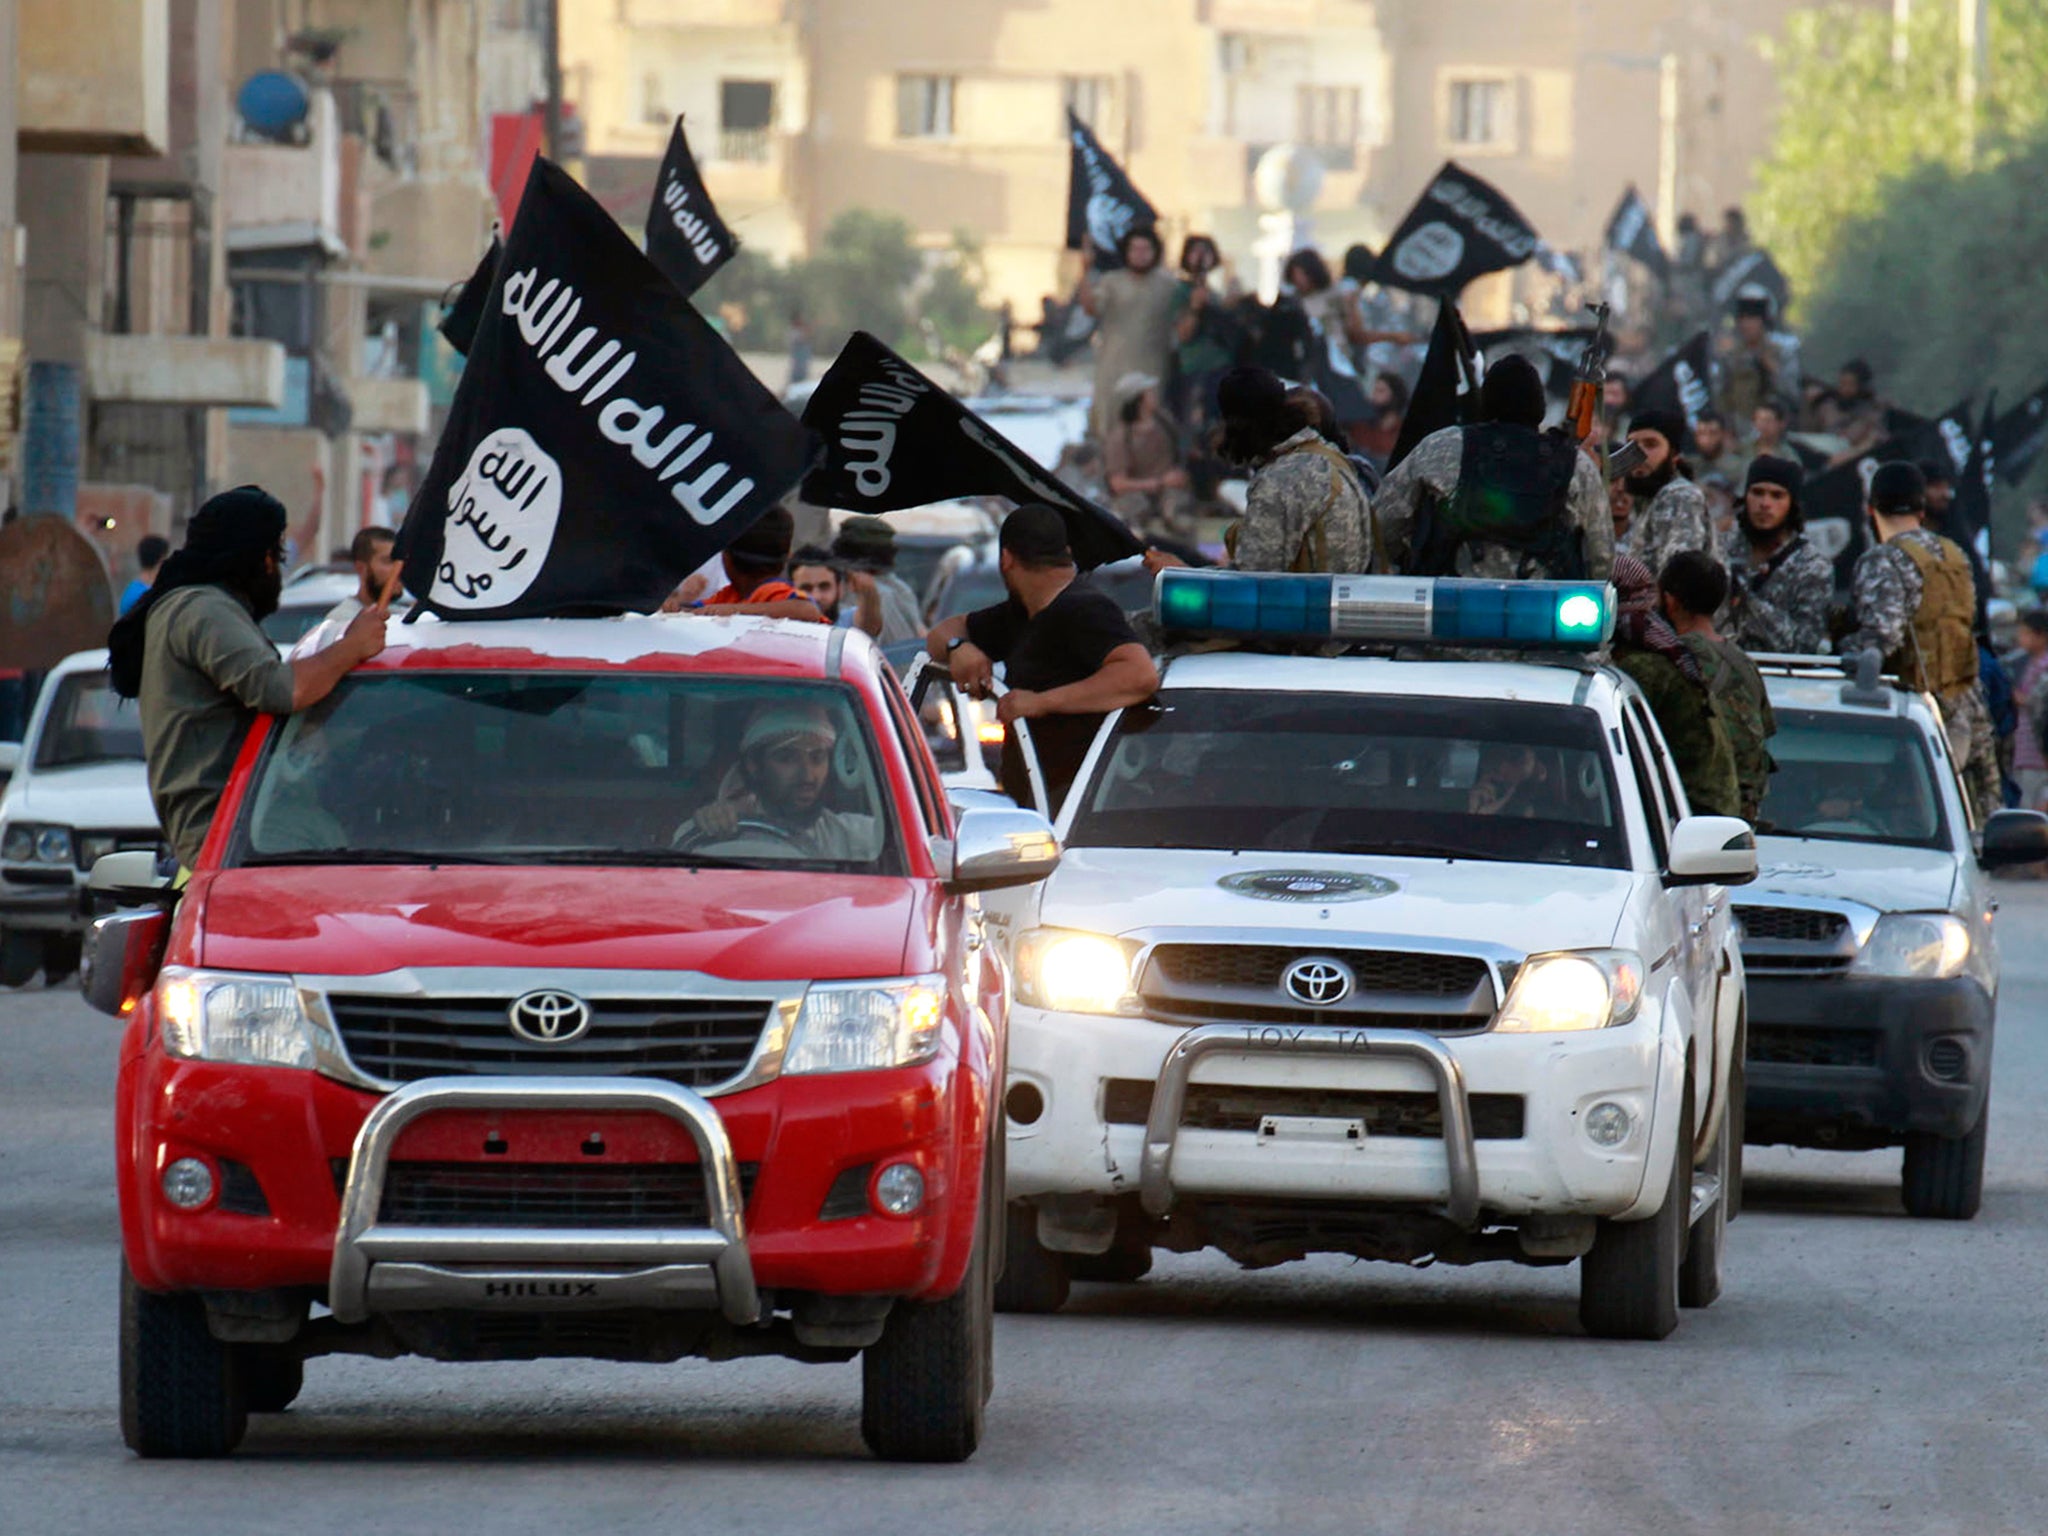 Isis fighters waving flags travel in Toyota vehicles as they take part in a military parade along the streets of Syria's northern Raqqa province